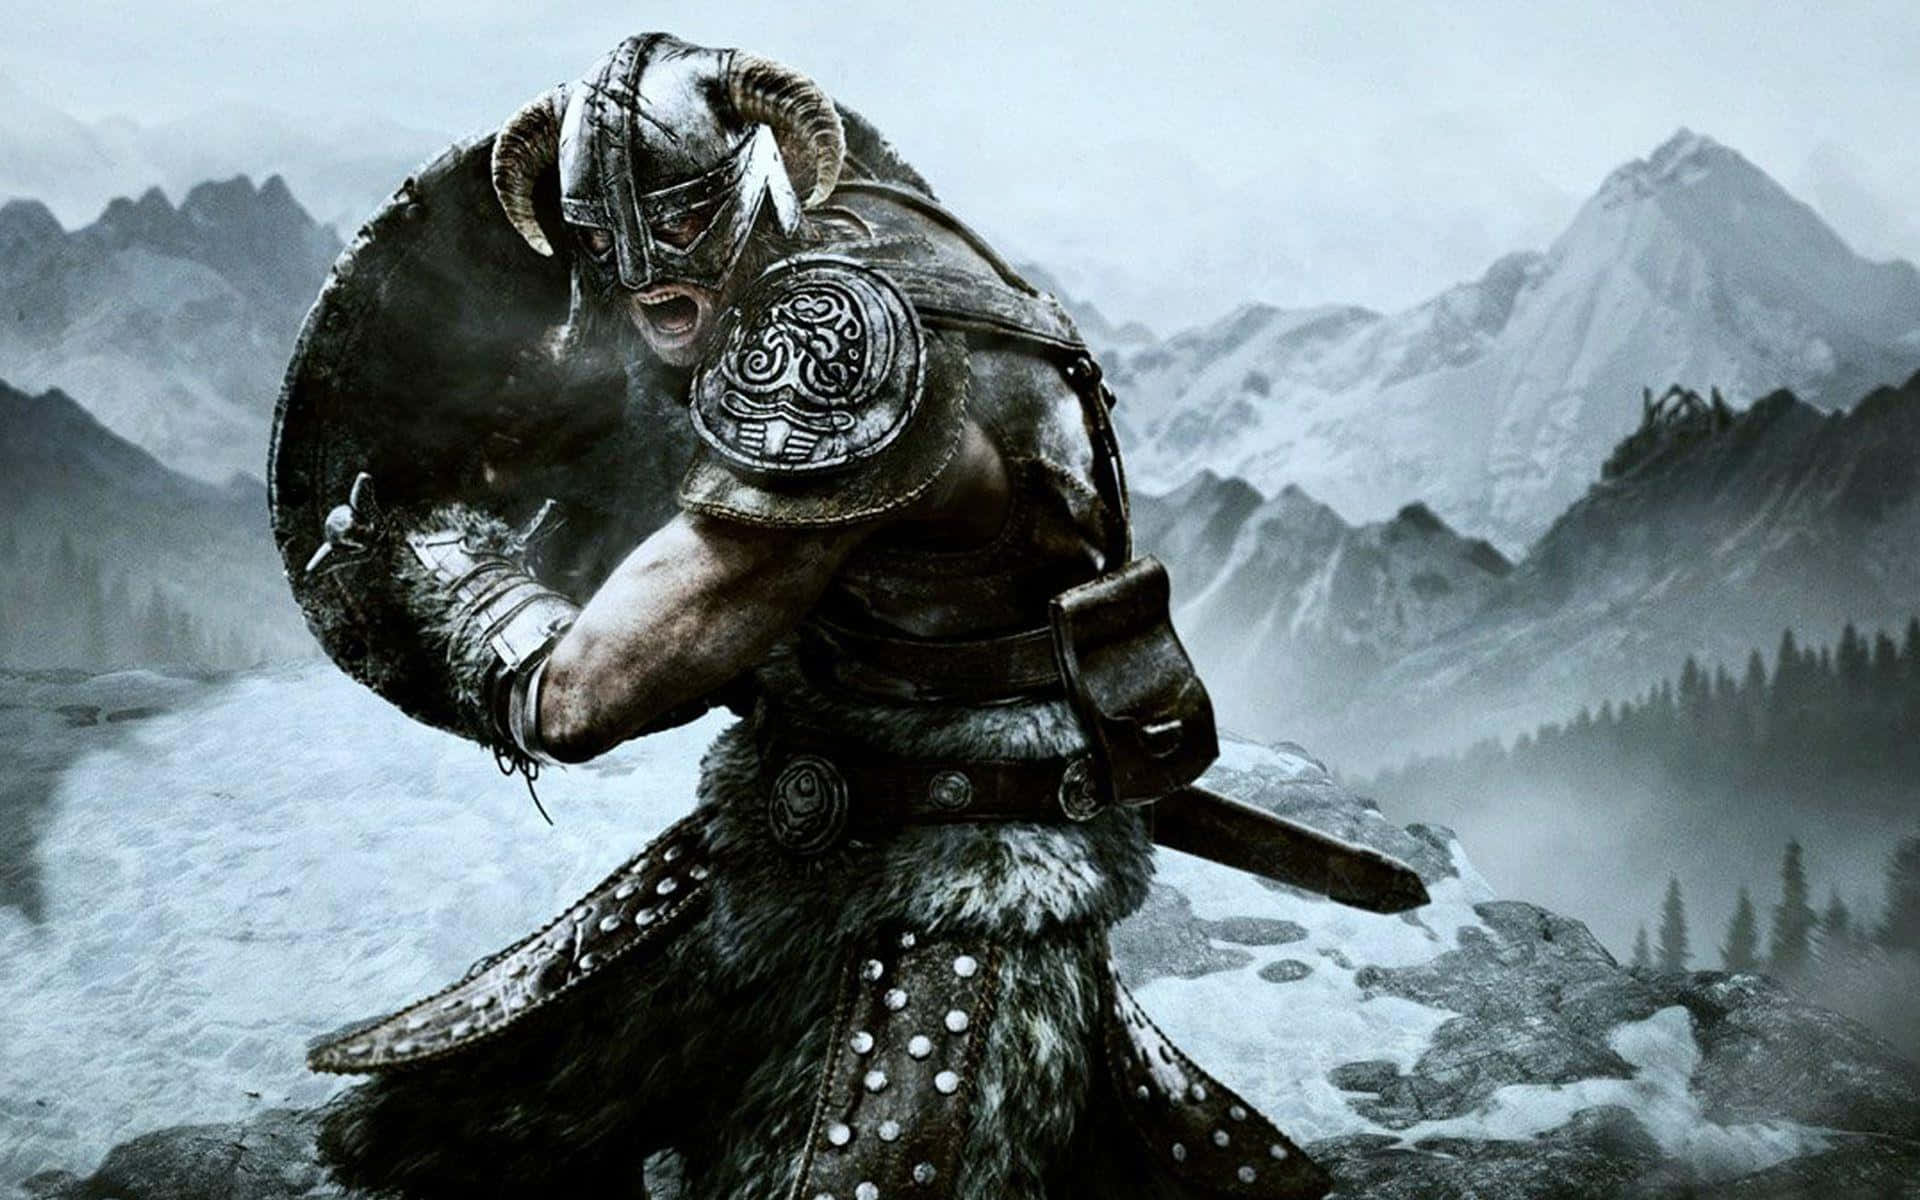 The Dovahkiin, Dragonborn Hero of Skyrim, Standing Strong Against the Backdrop of Nordic Scenery Wallpaper